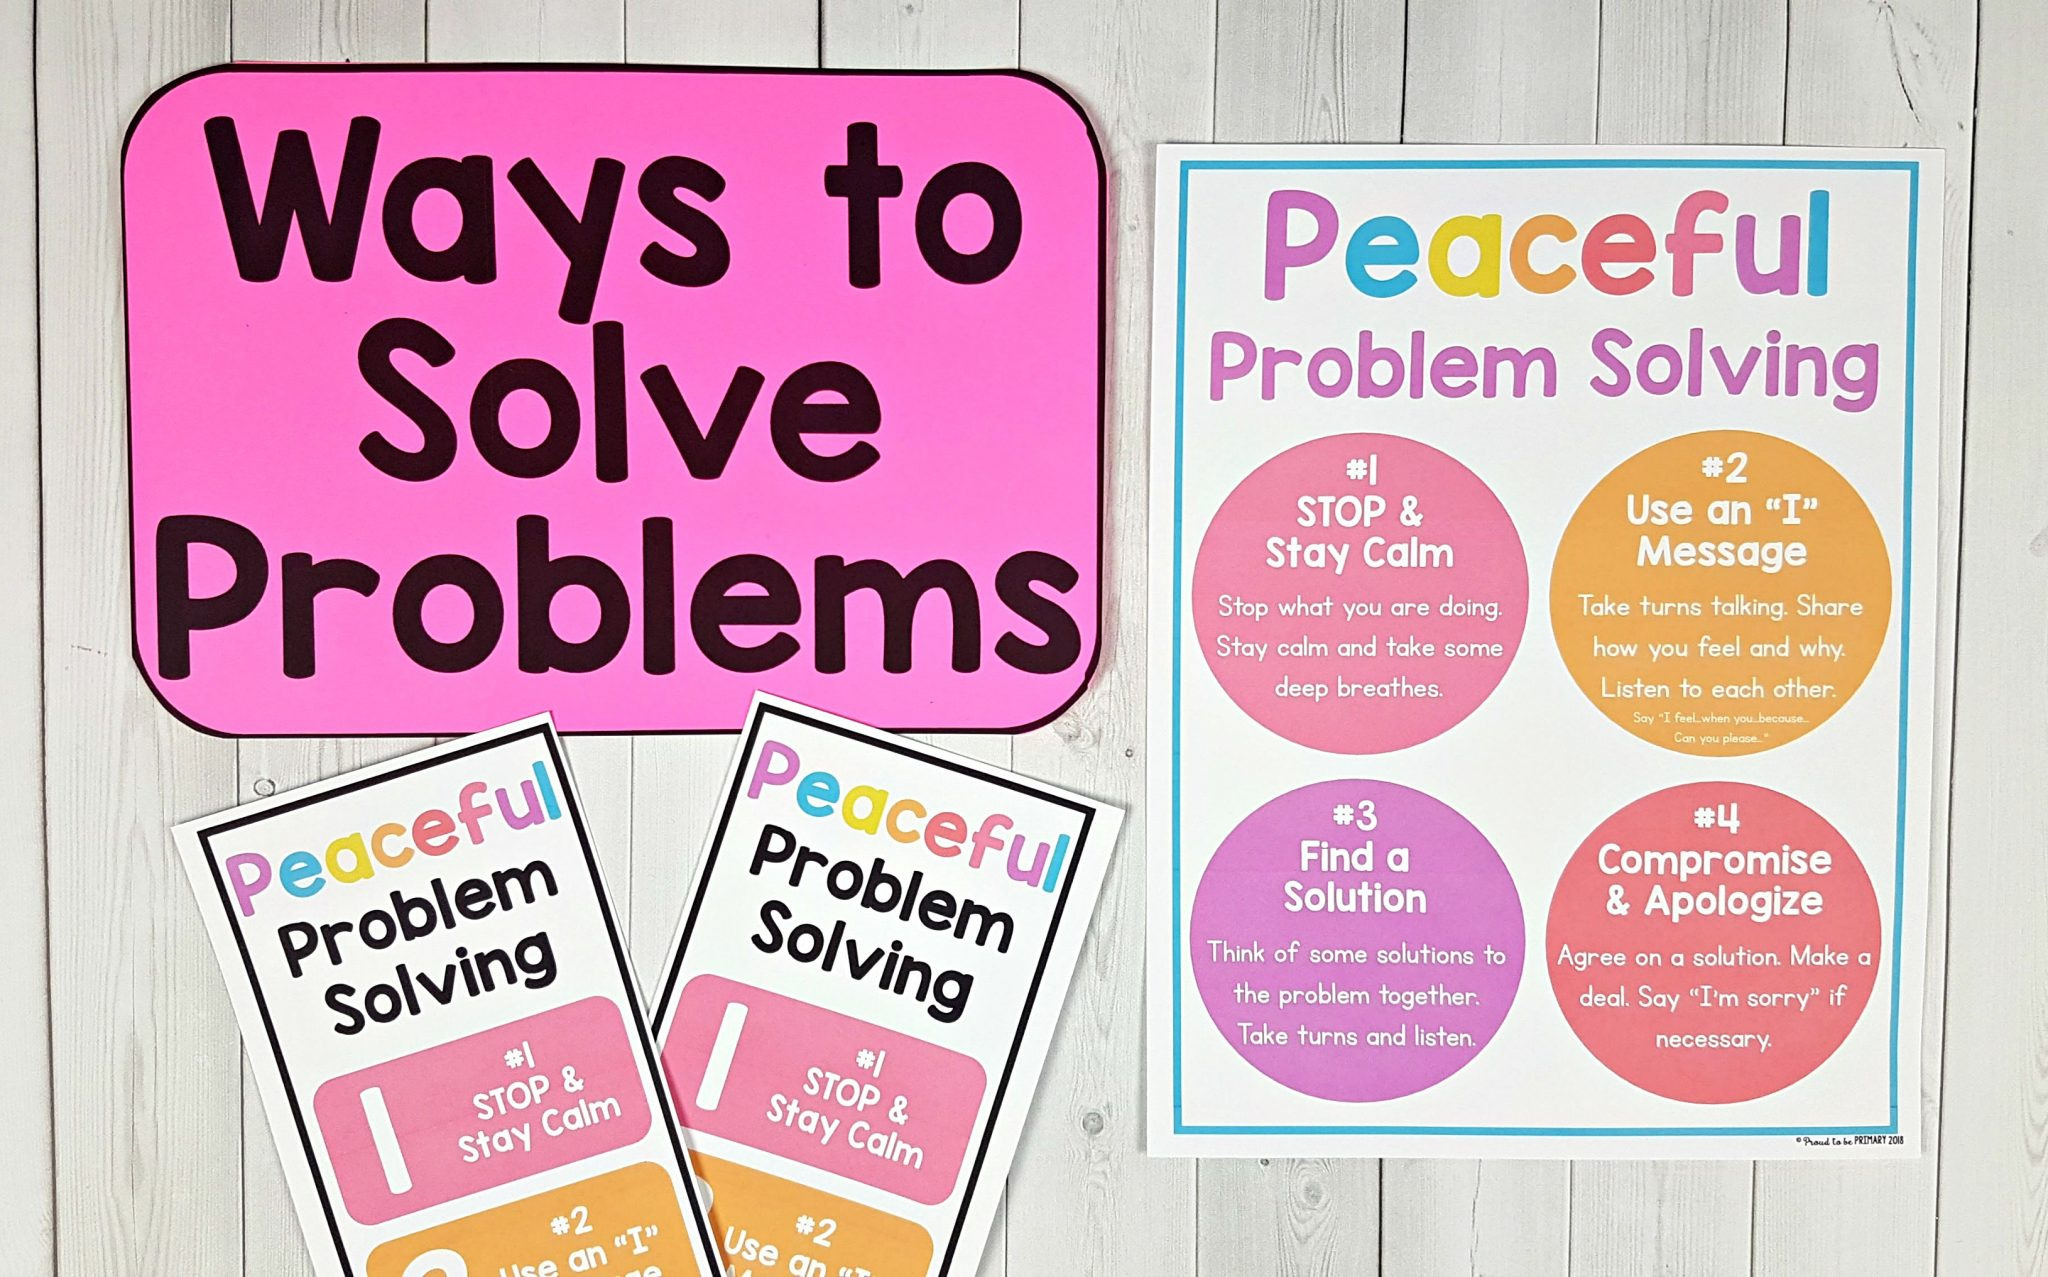 Solve their problems. Problem solving activities. Problem-solving activities for Kids. Problem solving tasks. Conflicts activities.